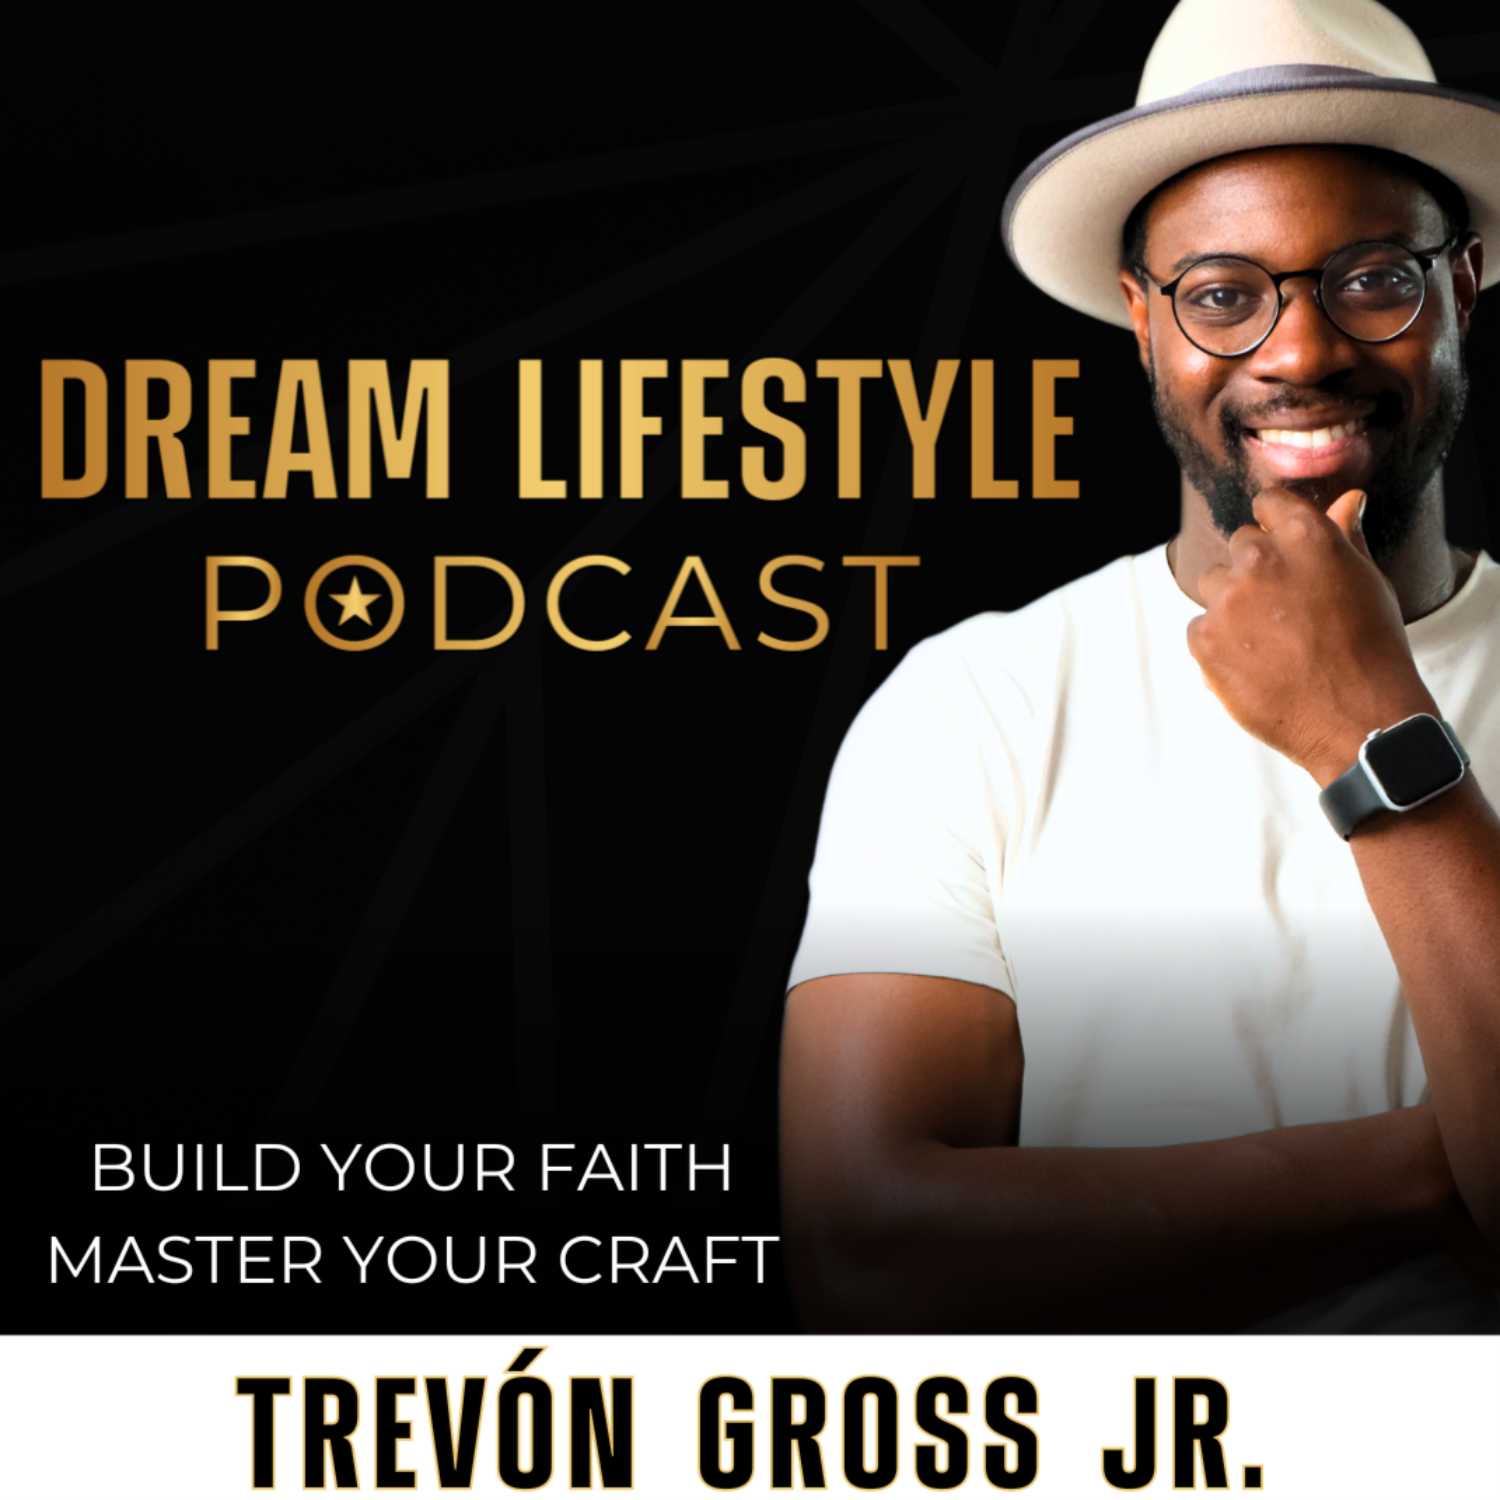 The Dream Lifestyle Podcast